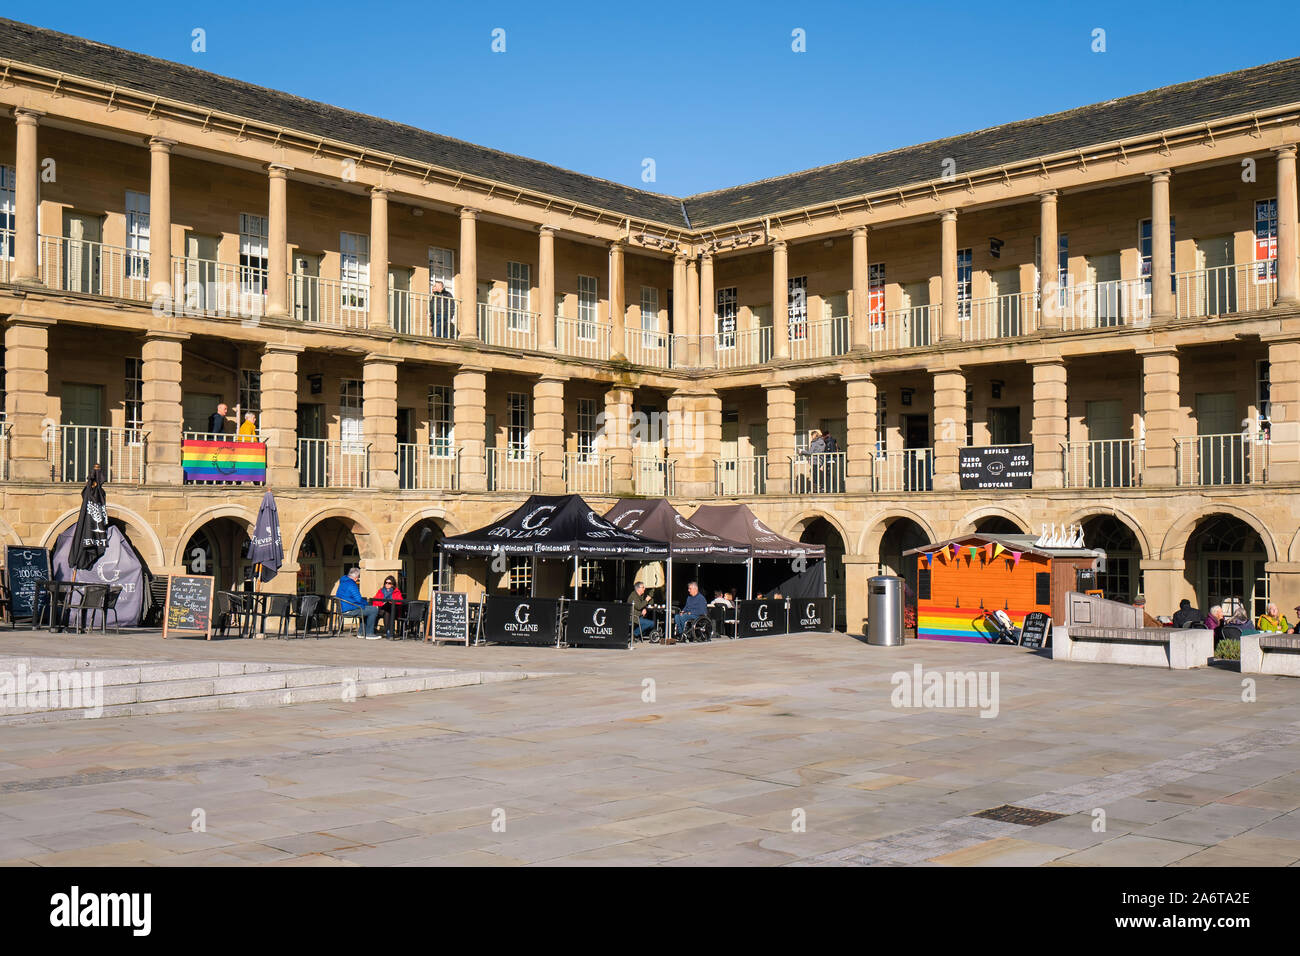 27.10.2019 Halifax, West Yorkshire, UK, The Piece Hall is a Grade I listed building in Halifax, West Yorkshire, England. It was built as a cloth hall Stock Photo